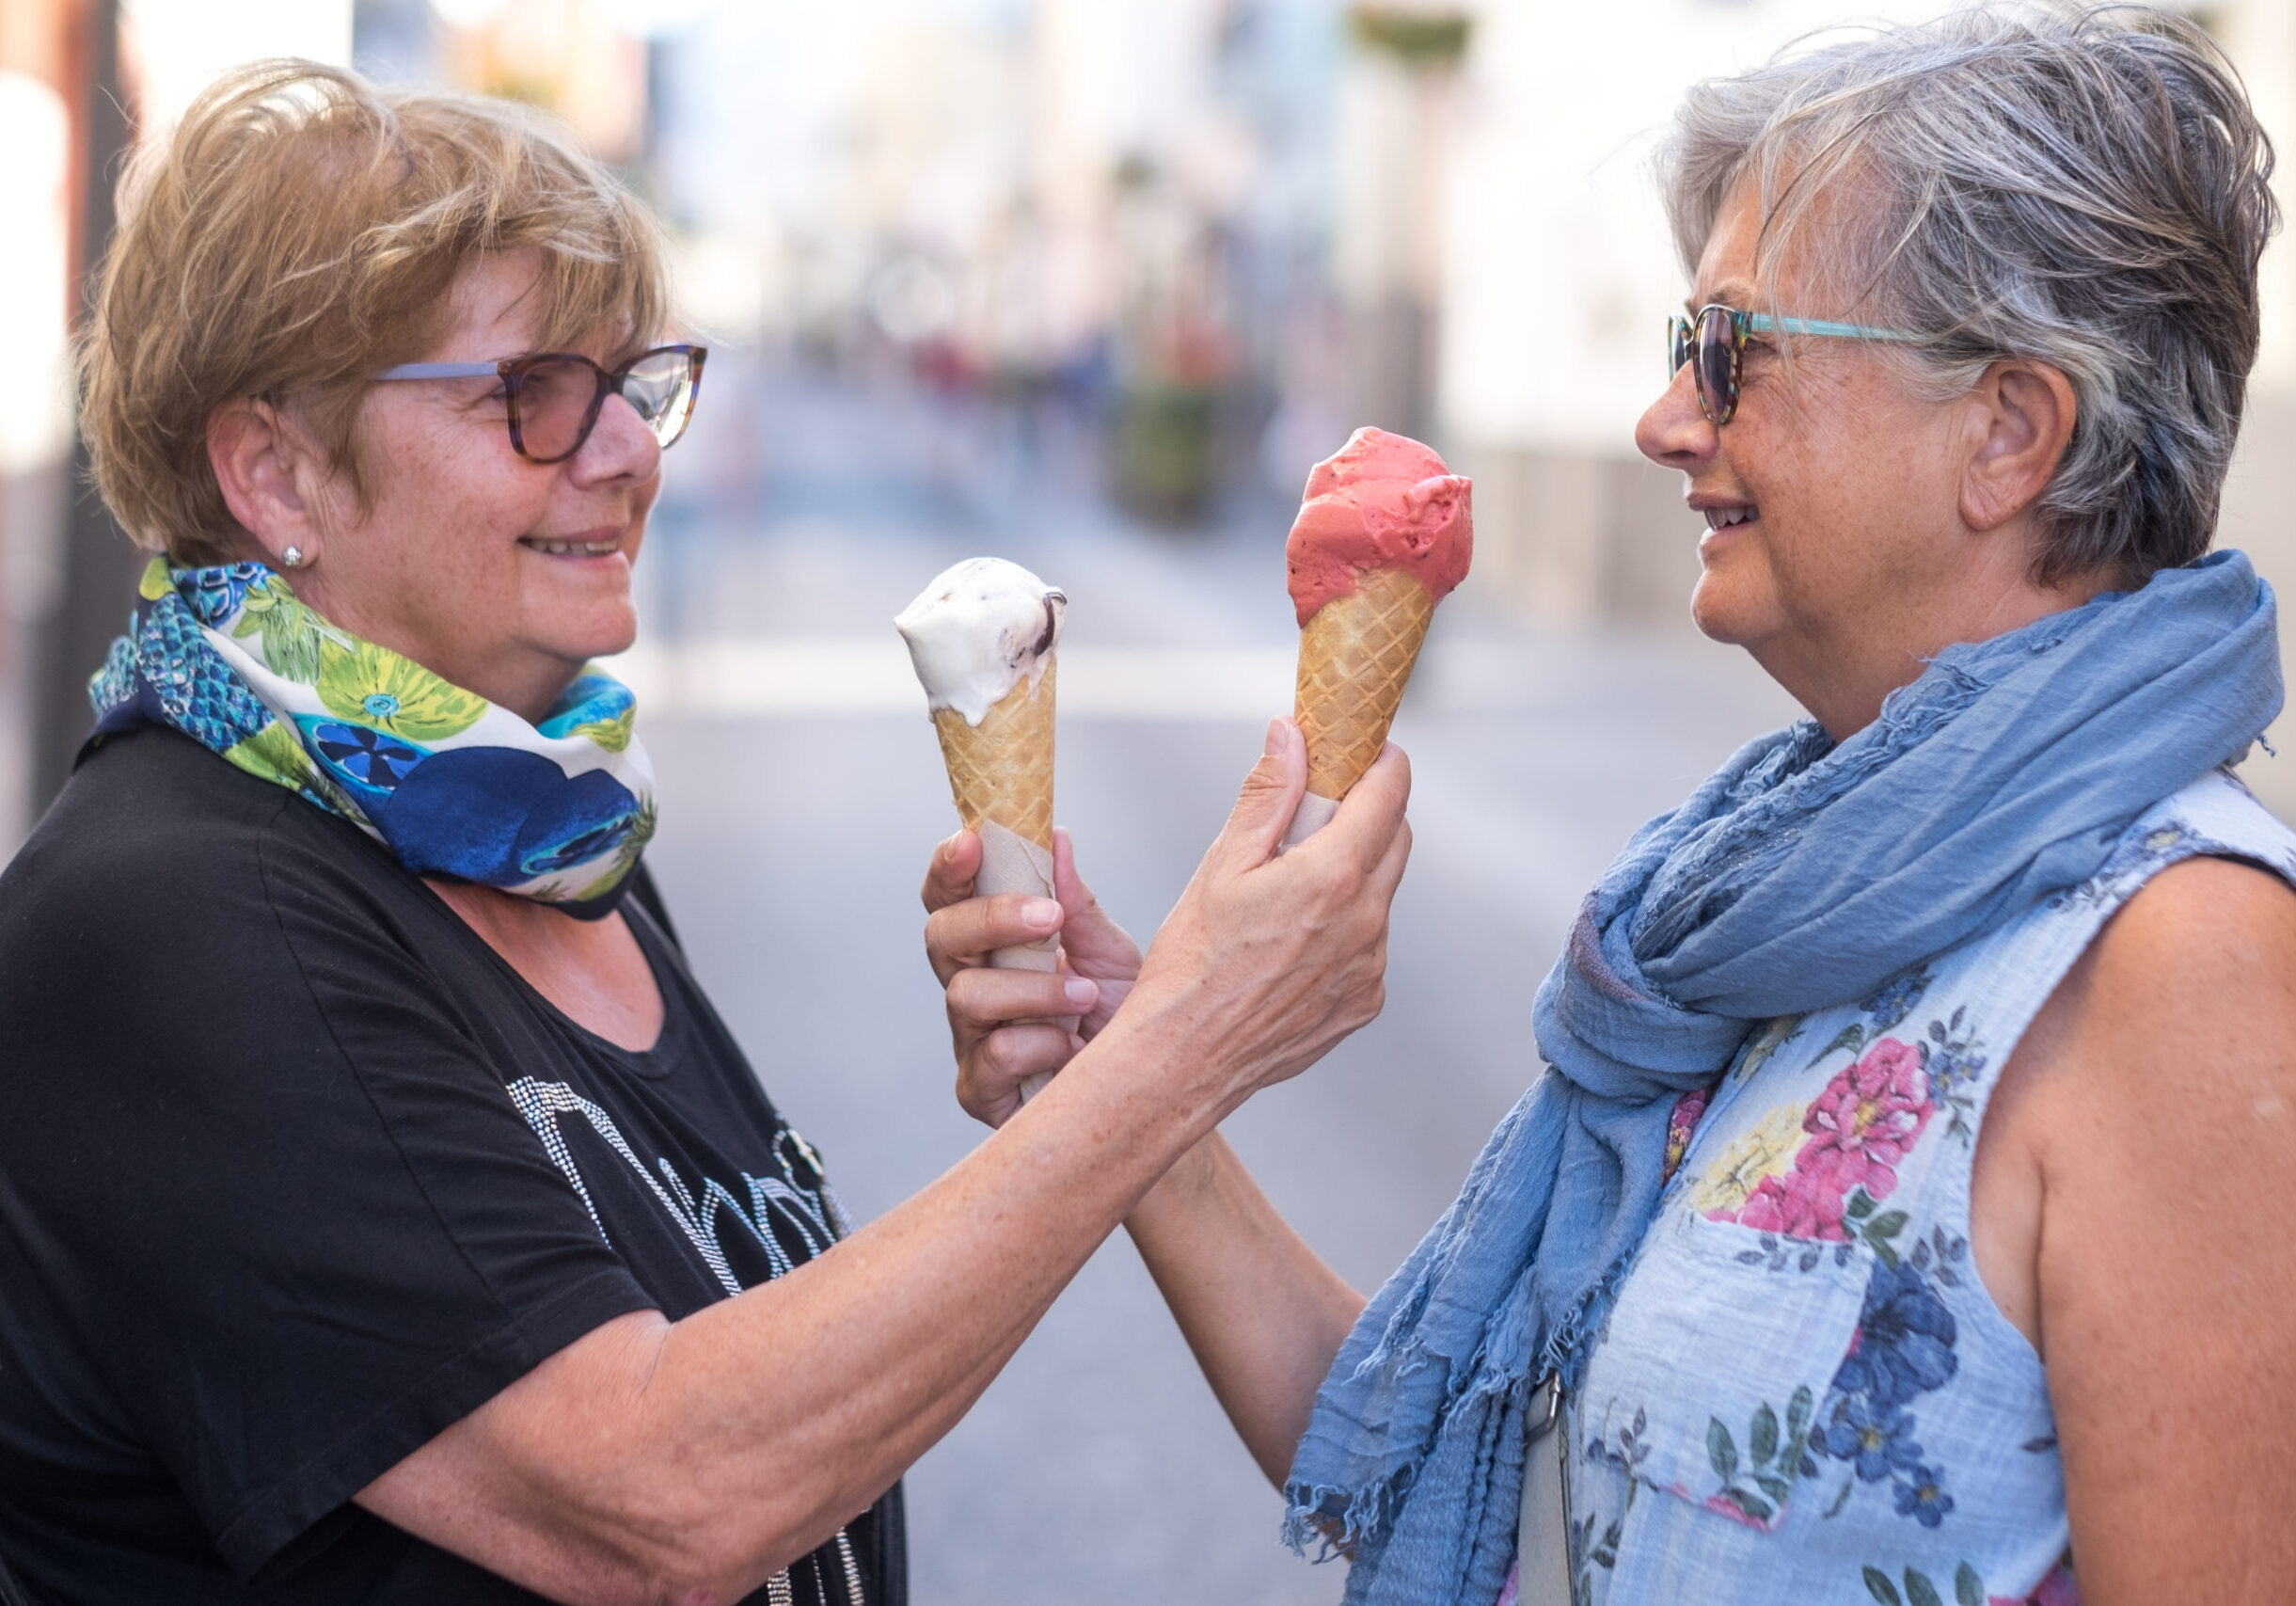 Two elderly women offer each other ice cream cones